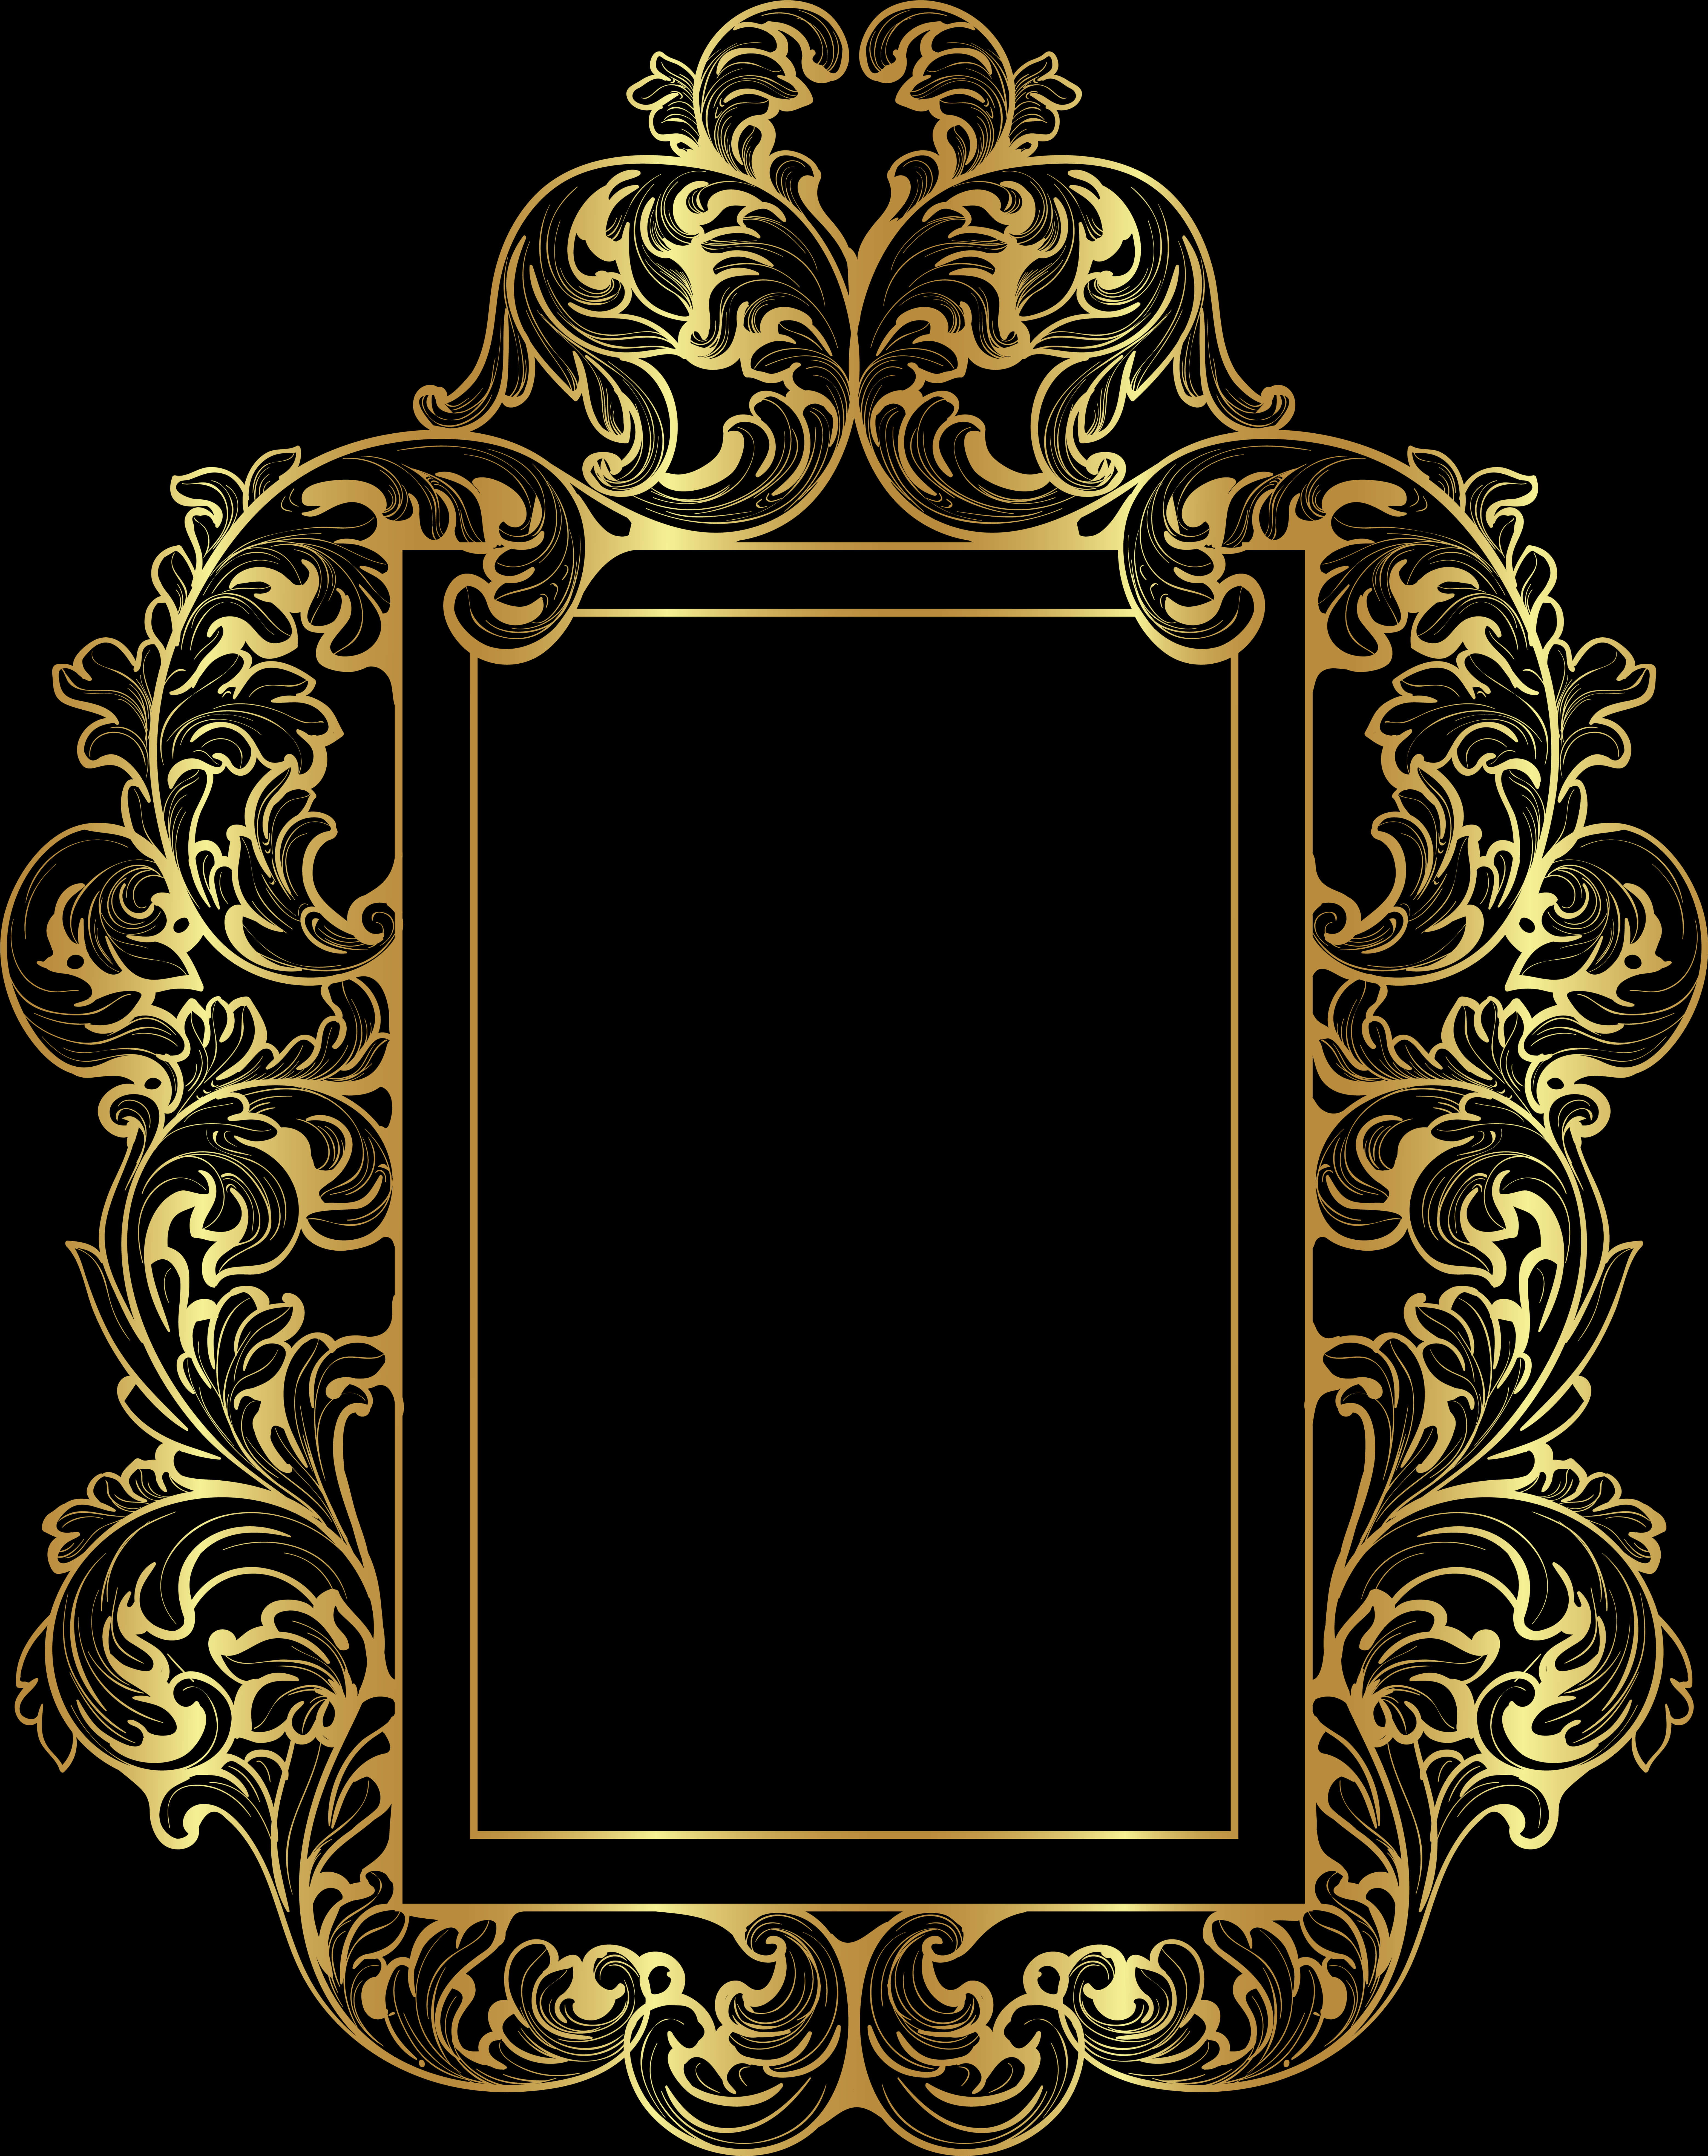 A Gold Ornate Frame With A Black Background